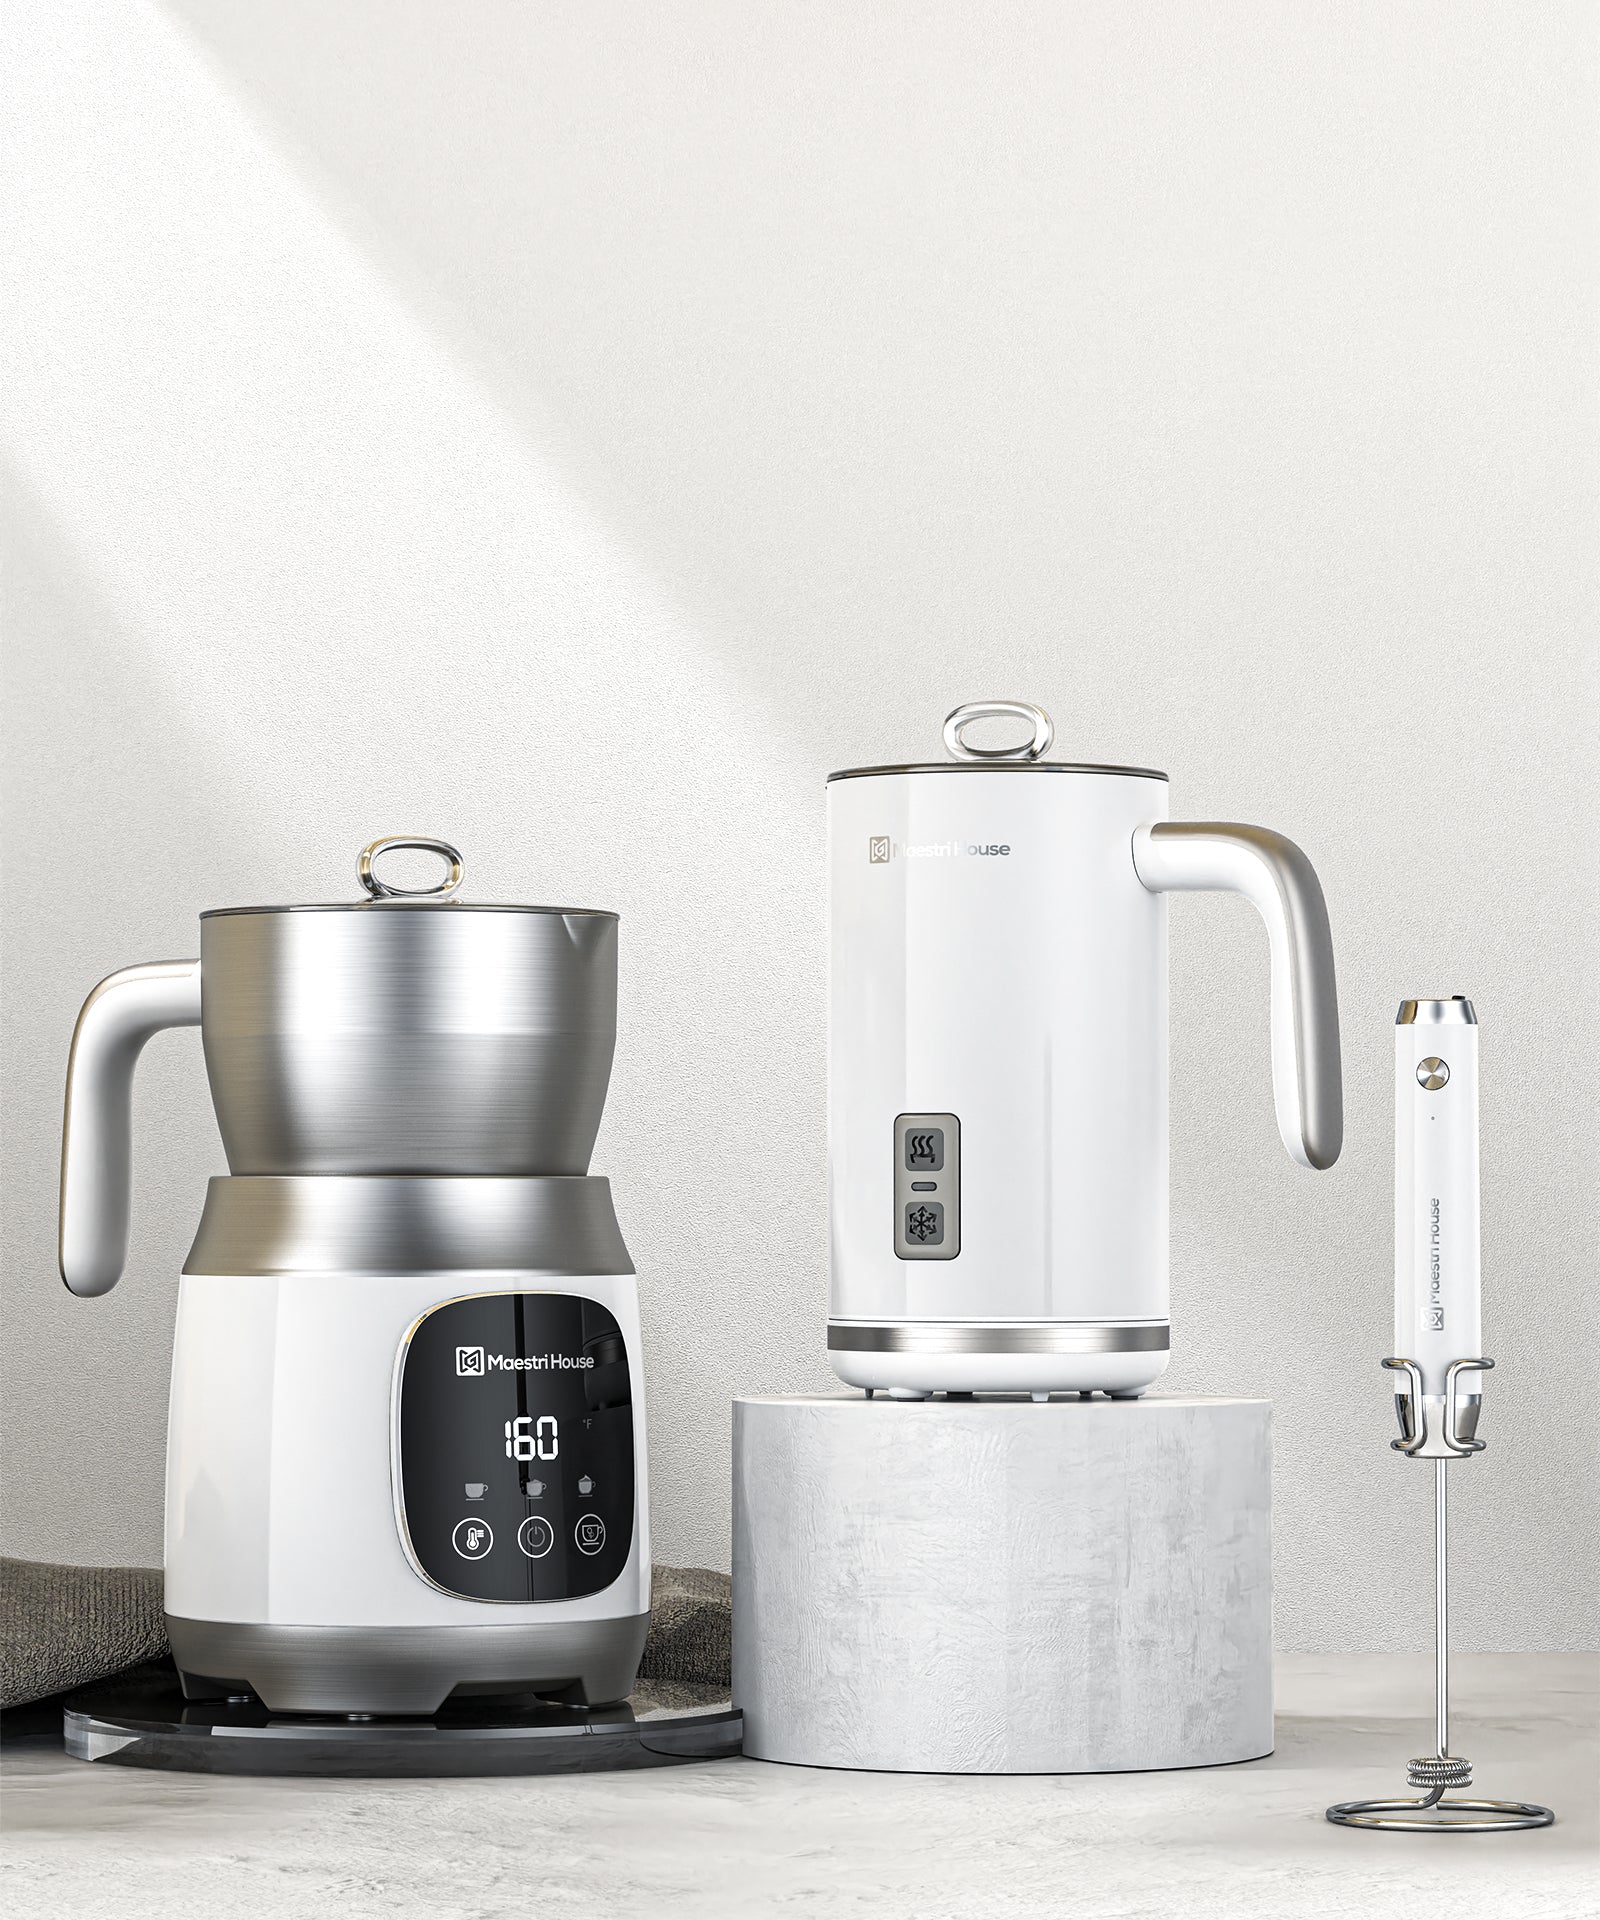 Maestri House™ Integrated Milk Frother MMF9201 - Moonlight White